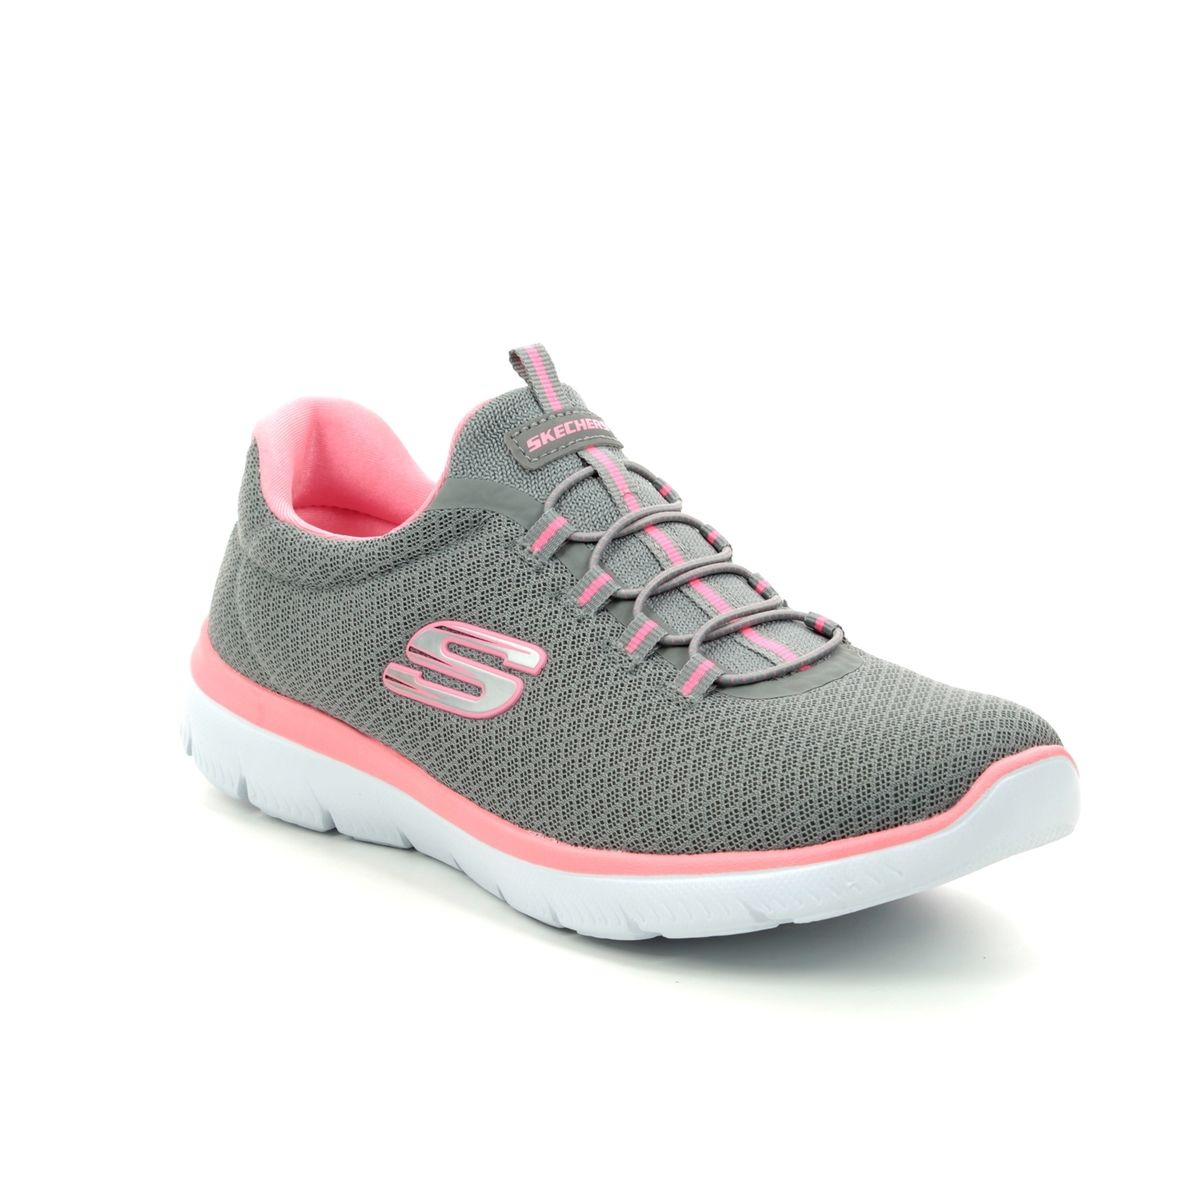 skechers grey and pink trainers, Up to 